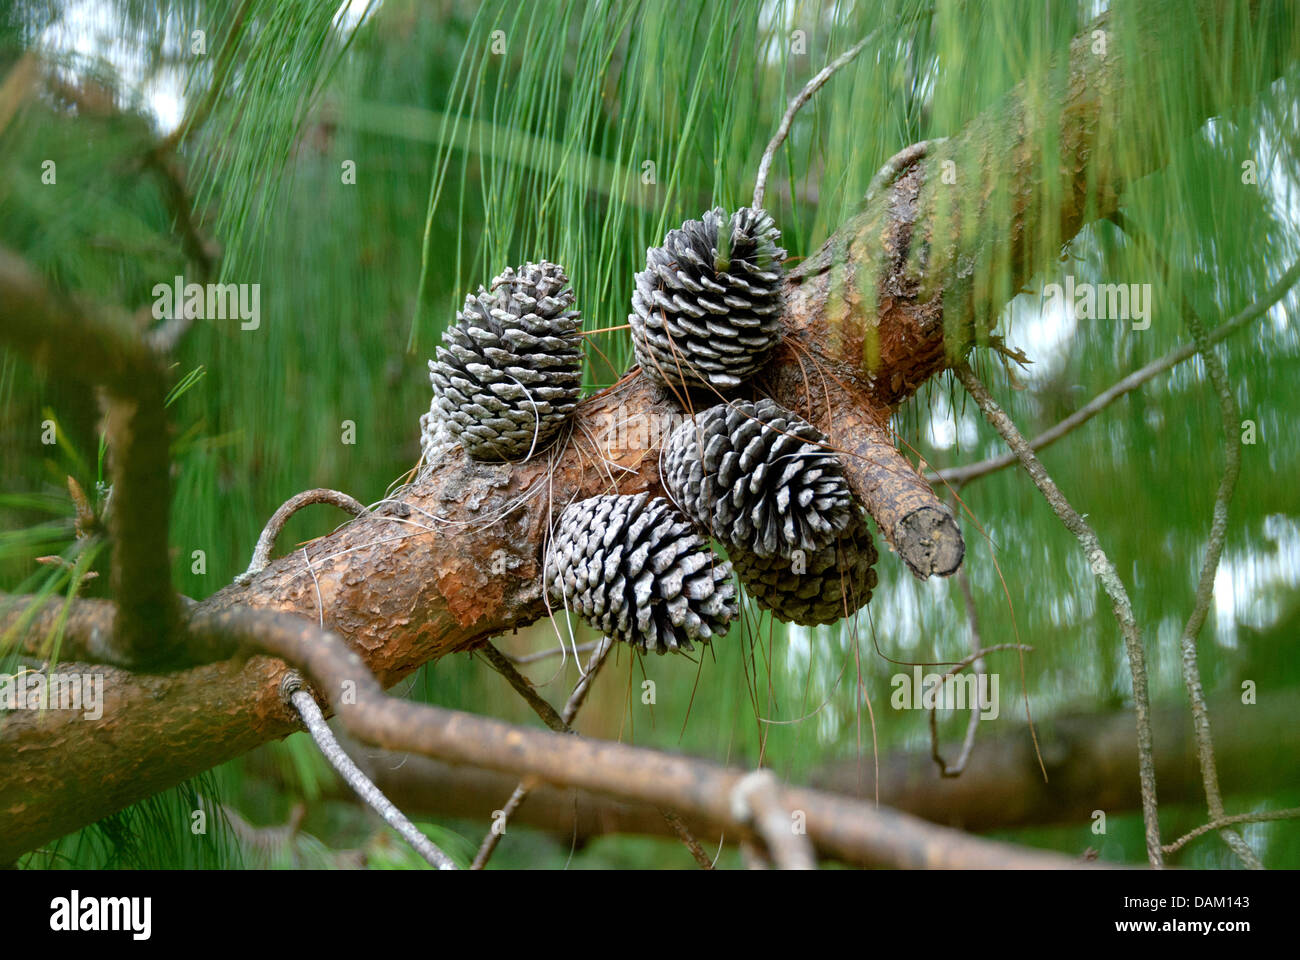 Patula pine, Mexican Weeping Pine (Pinus patula), branch with cones Stock Photo